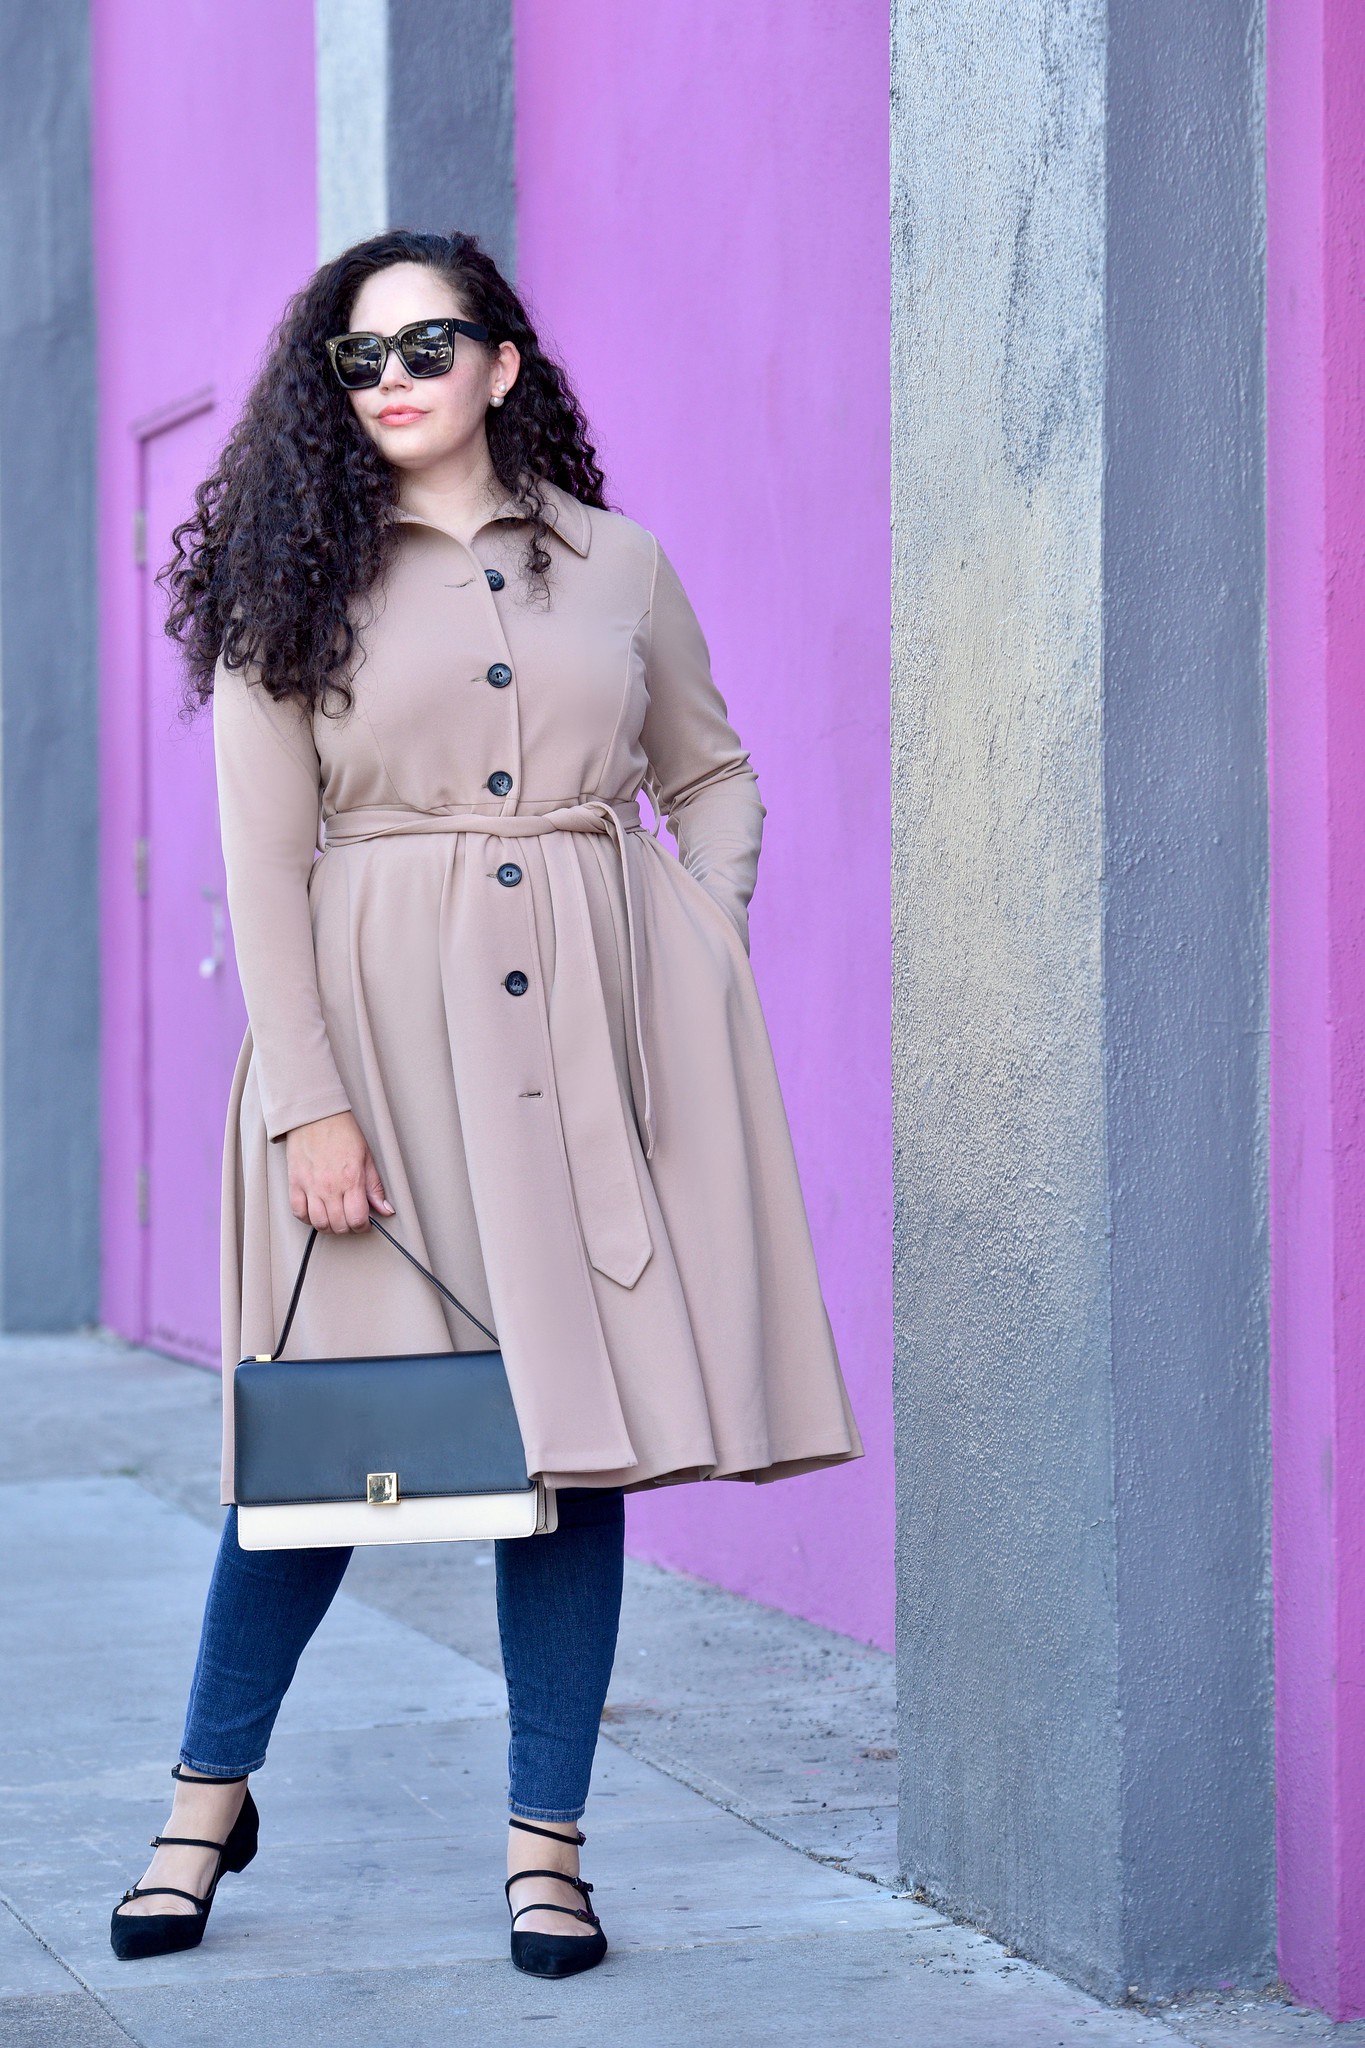 This Trench Dress Is Super Versatile Via Girl With Curves #plussizefashion #curvyfashion #girlwithcurves #trench #skinny #jeans #flats